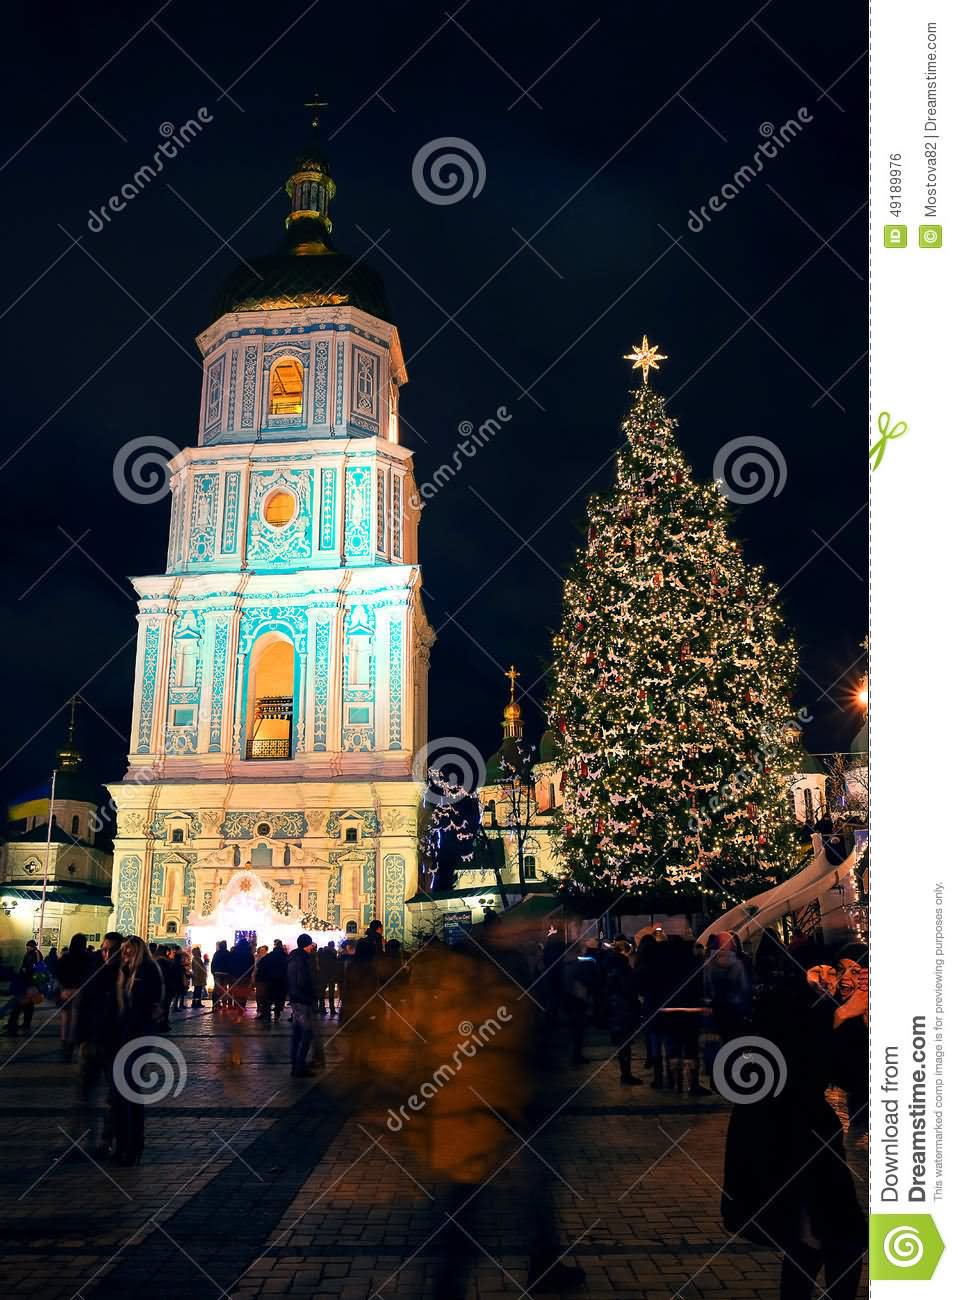 The Bell Tower Of Saint Sophia Cathedral And Christmas Tree At Night